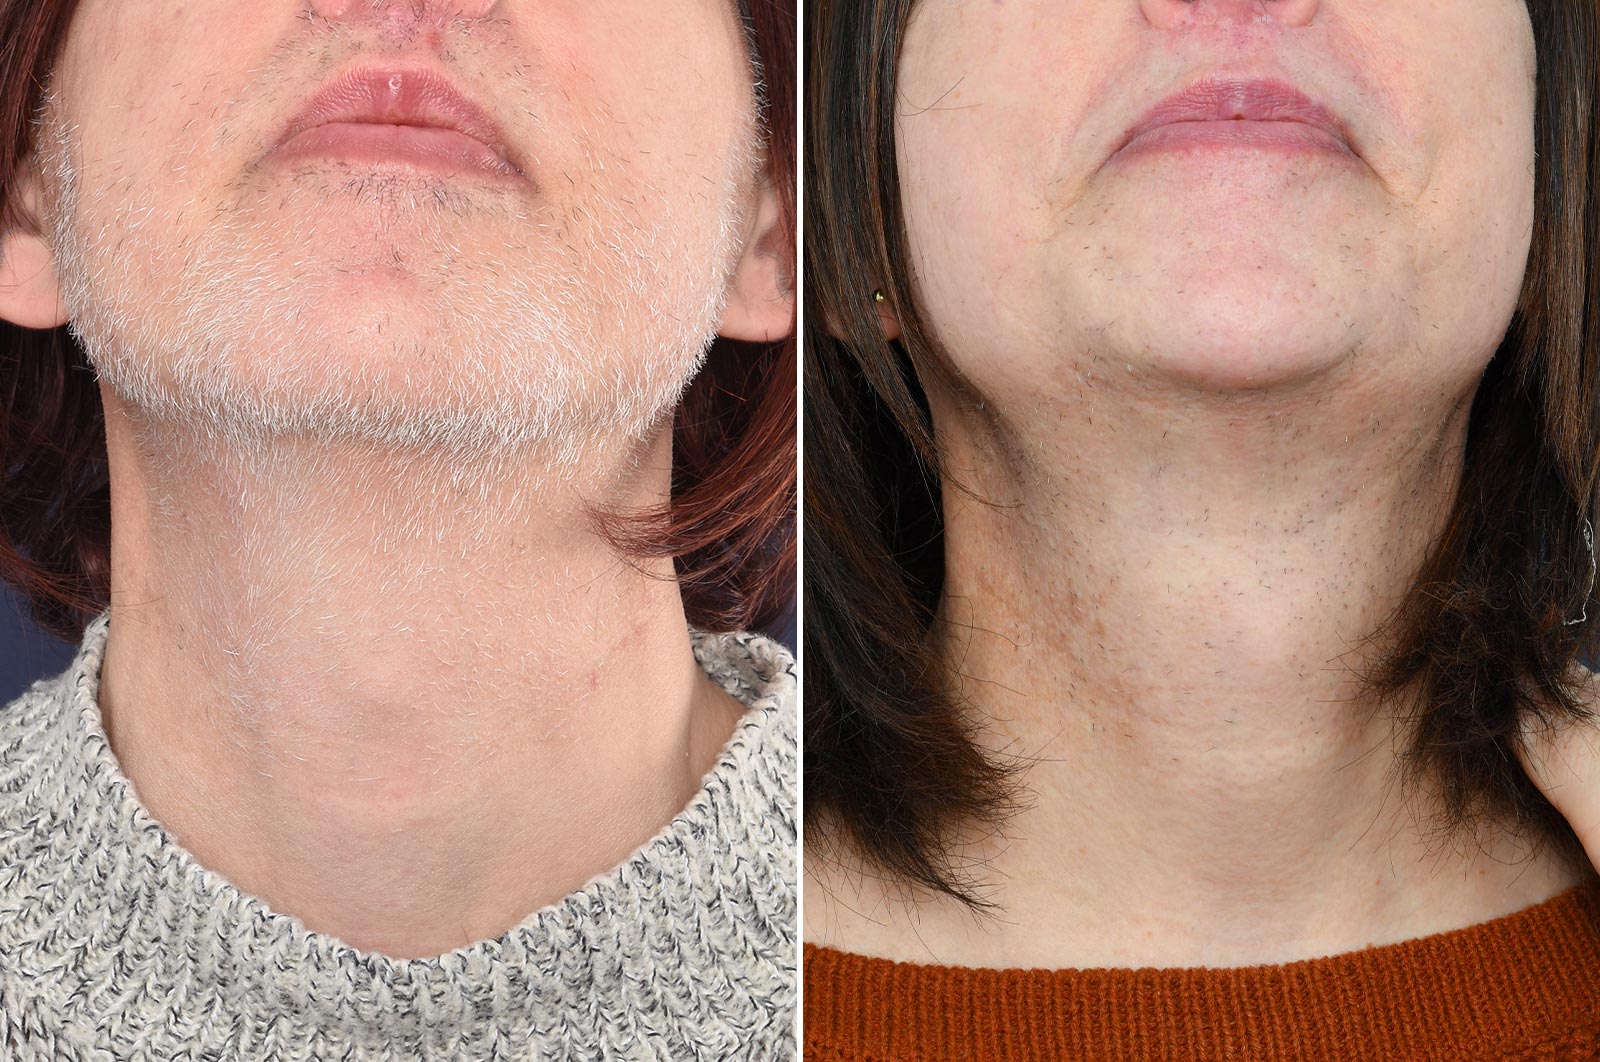 Electrolysis vs. Laser Hair Removal: Which Is Best For Facial Hair?